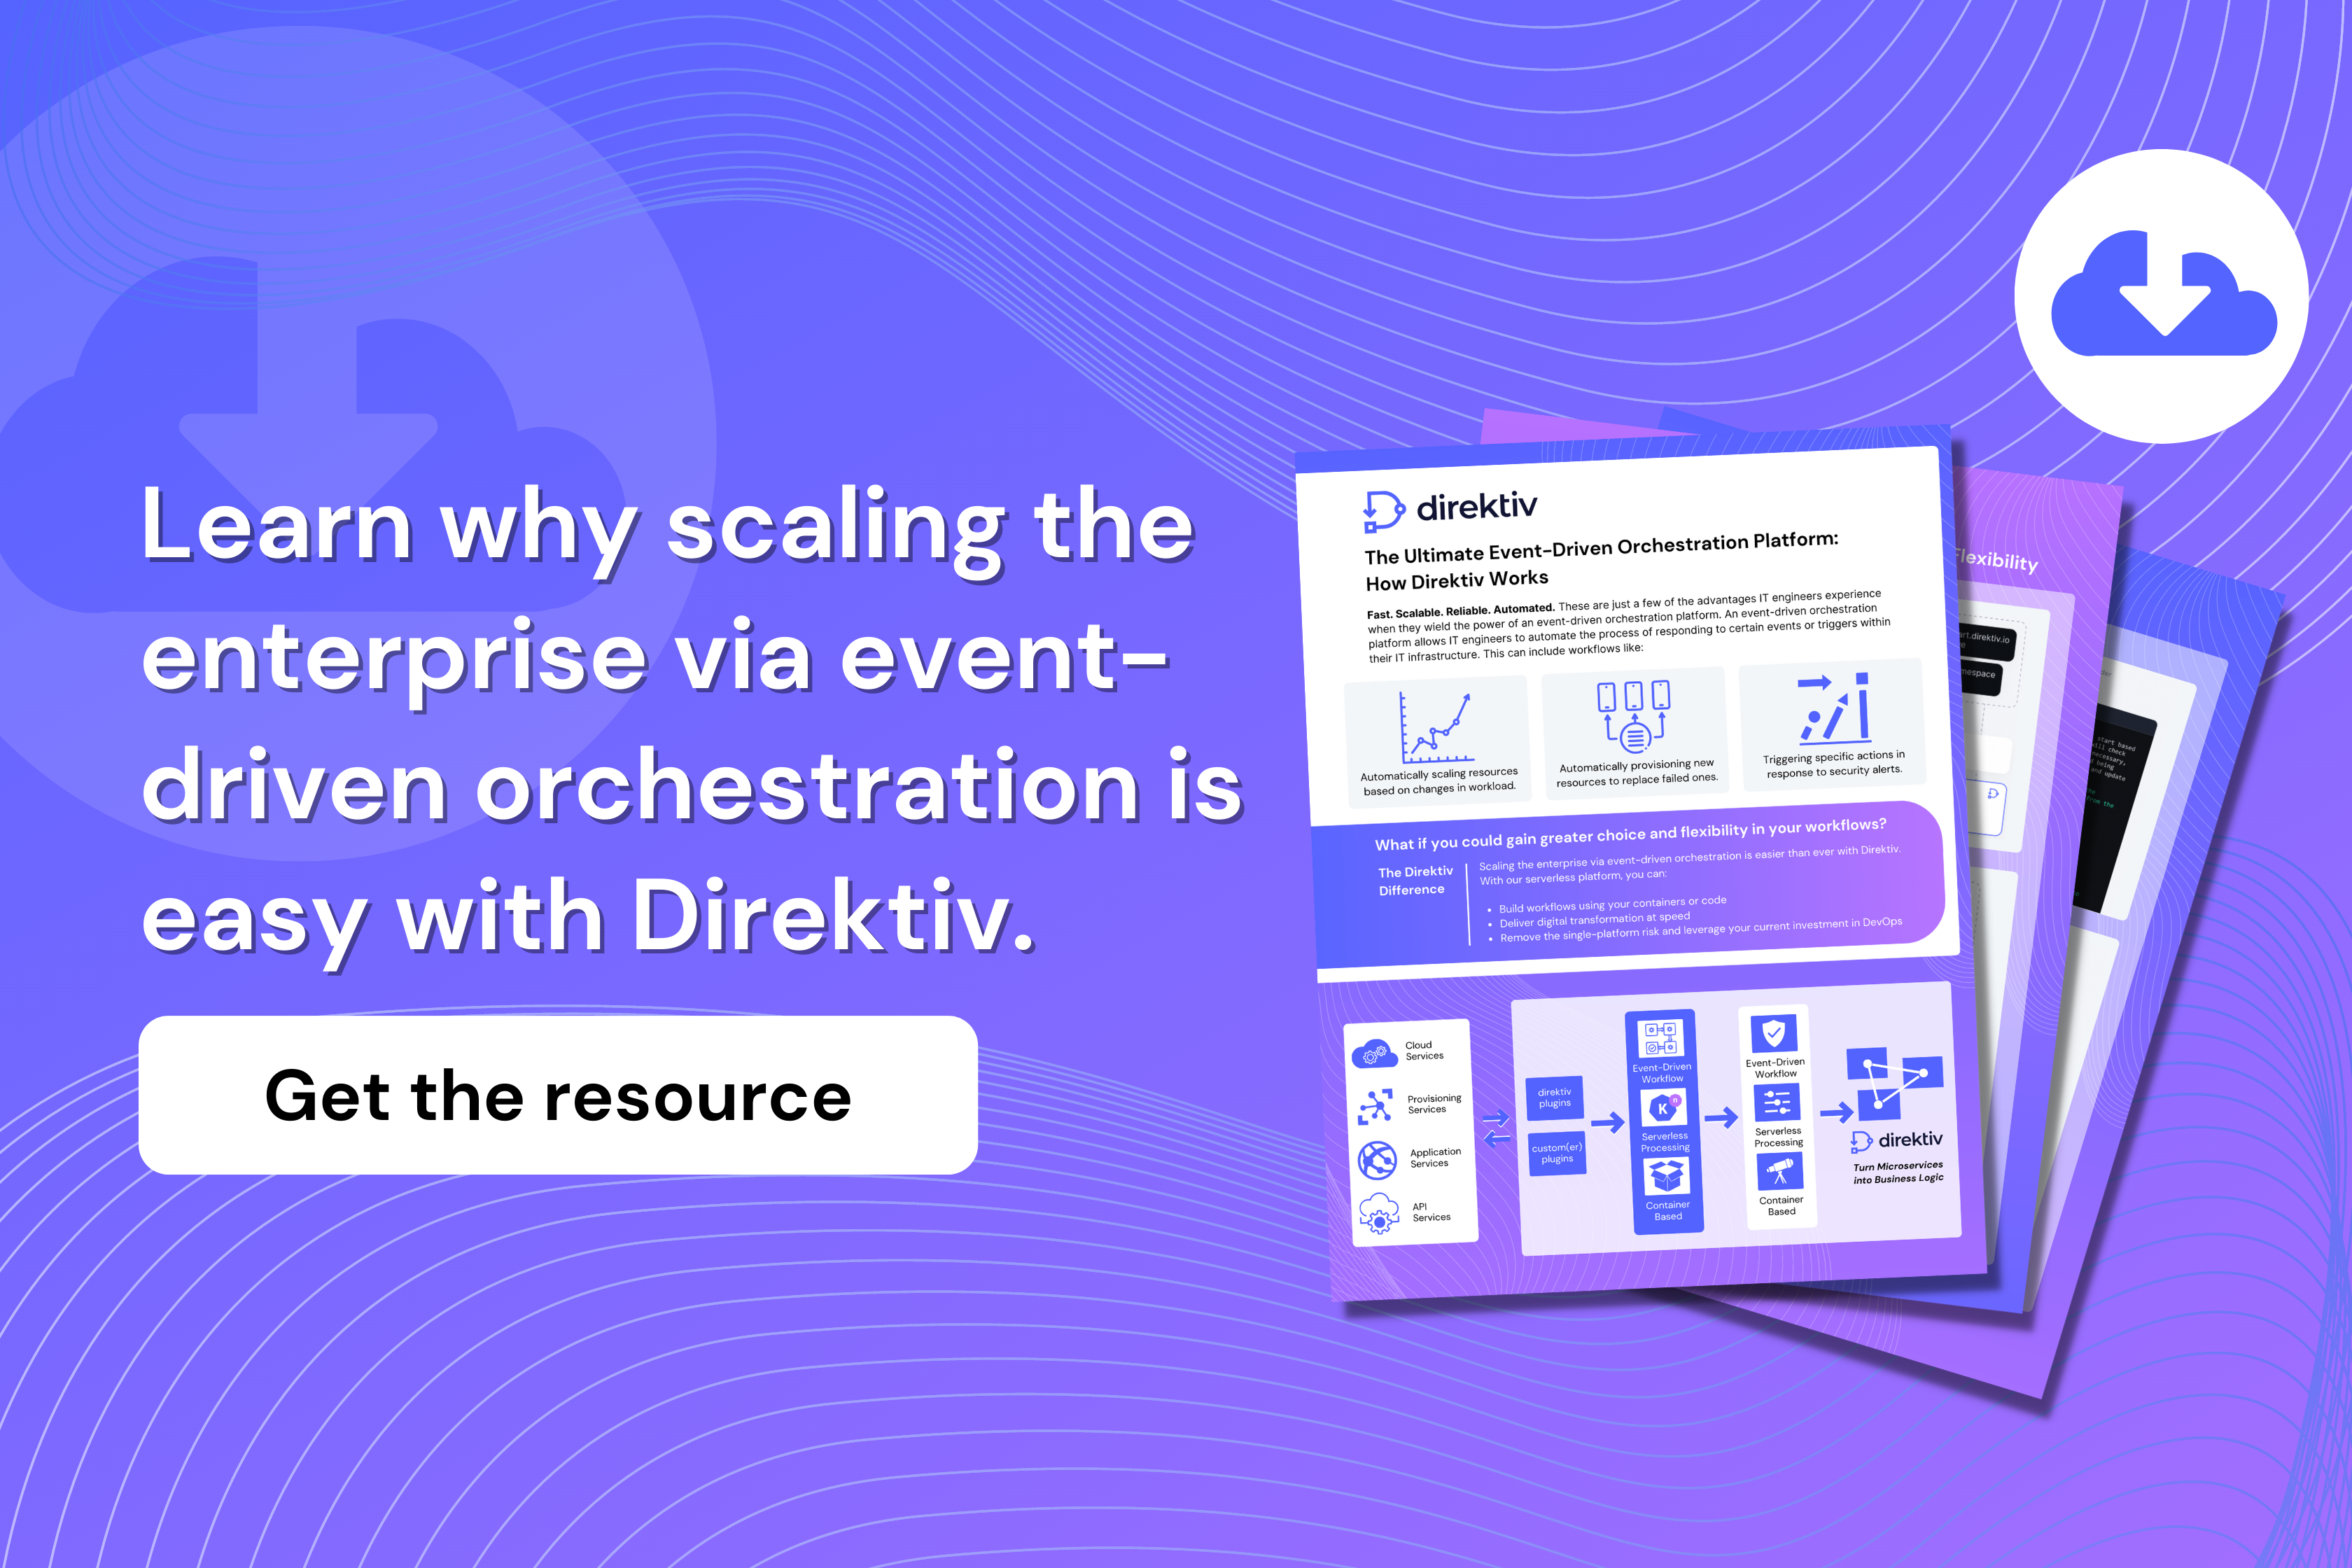 What if you could gain greater choice & flexibility in your workflows? Scaling the enterprise via event-driven orchestration is easy with Direktiv.